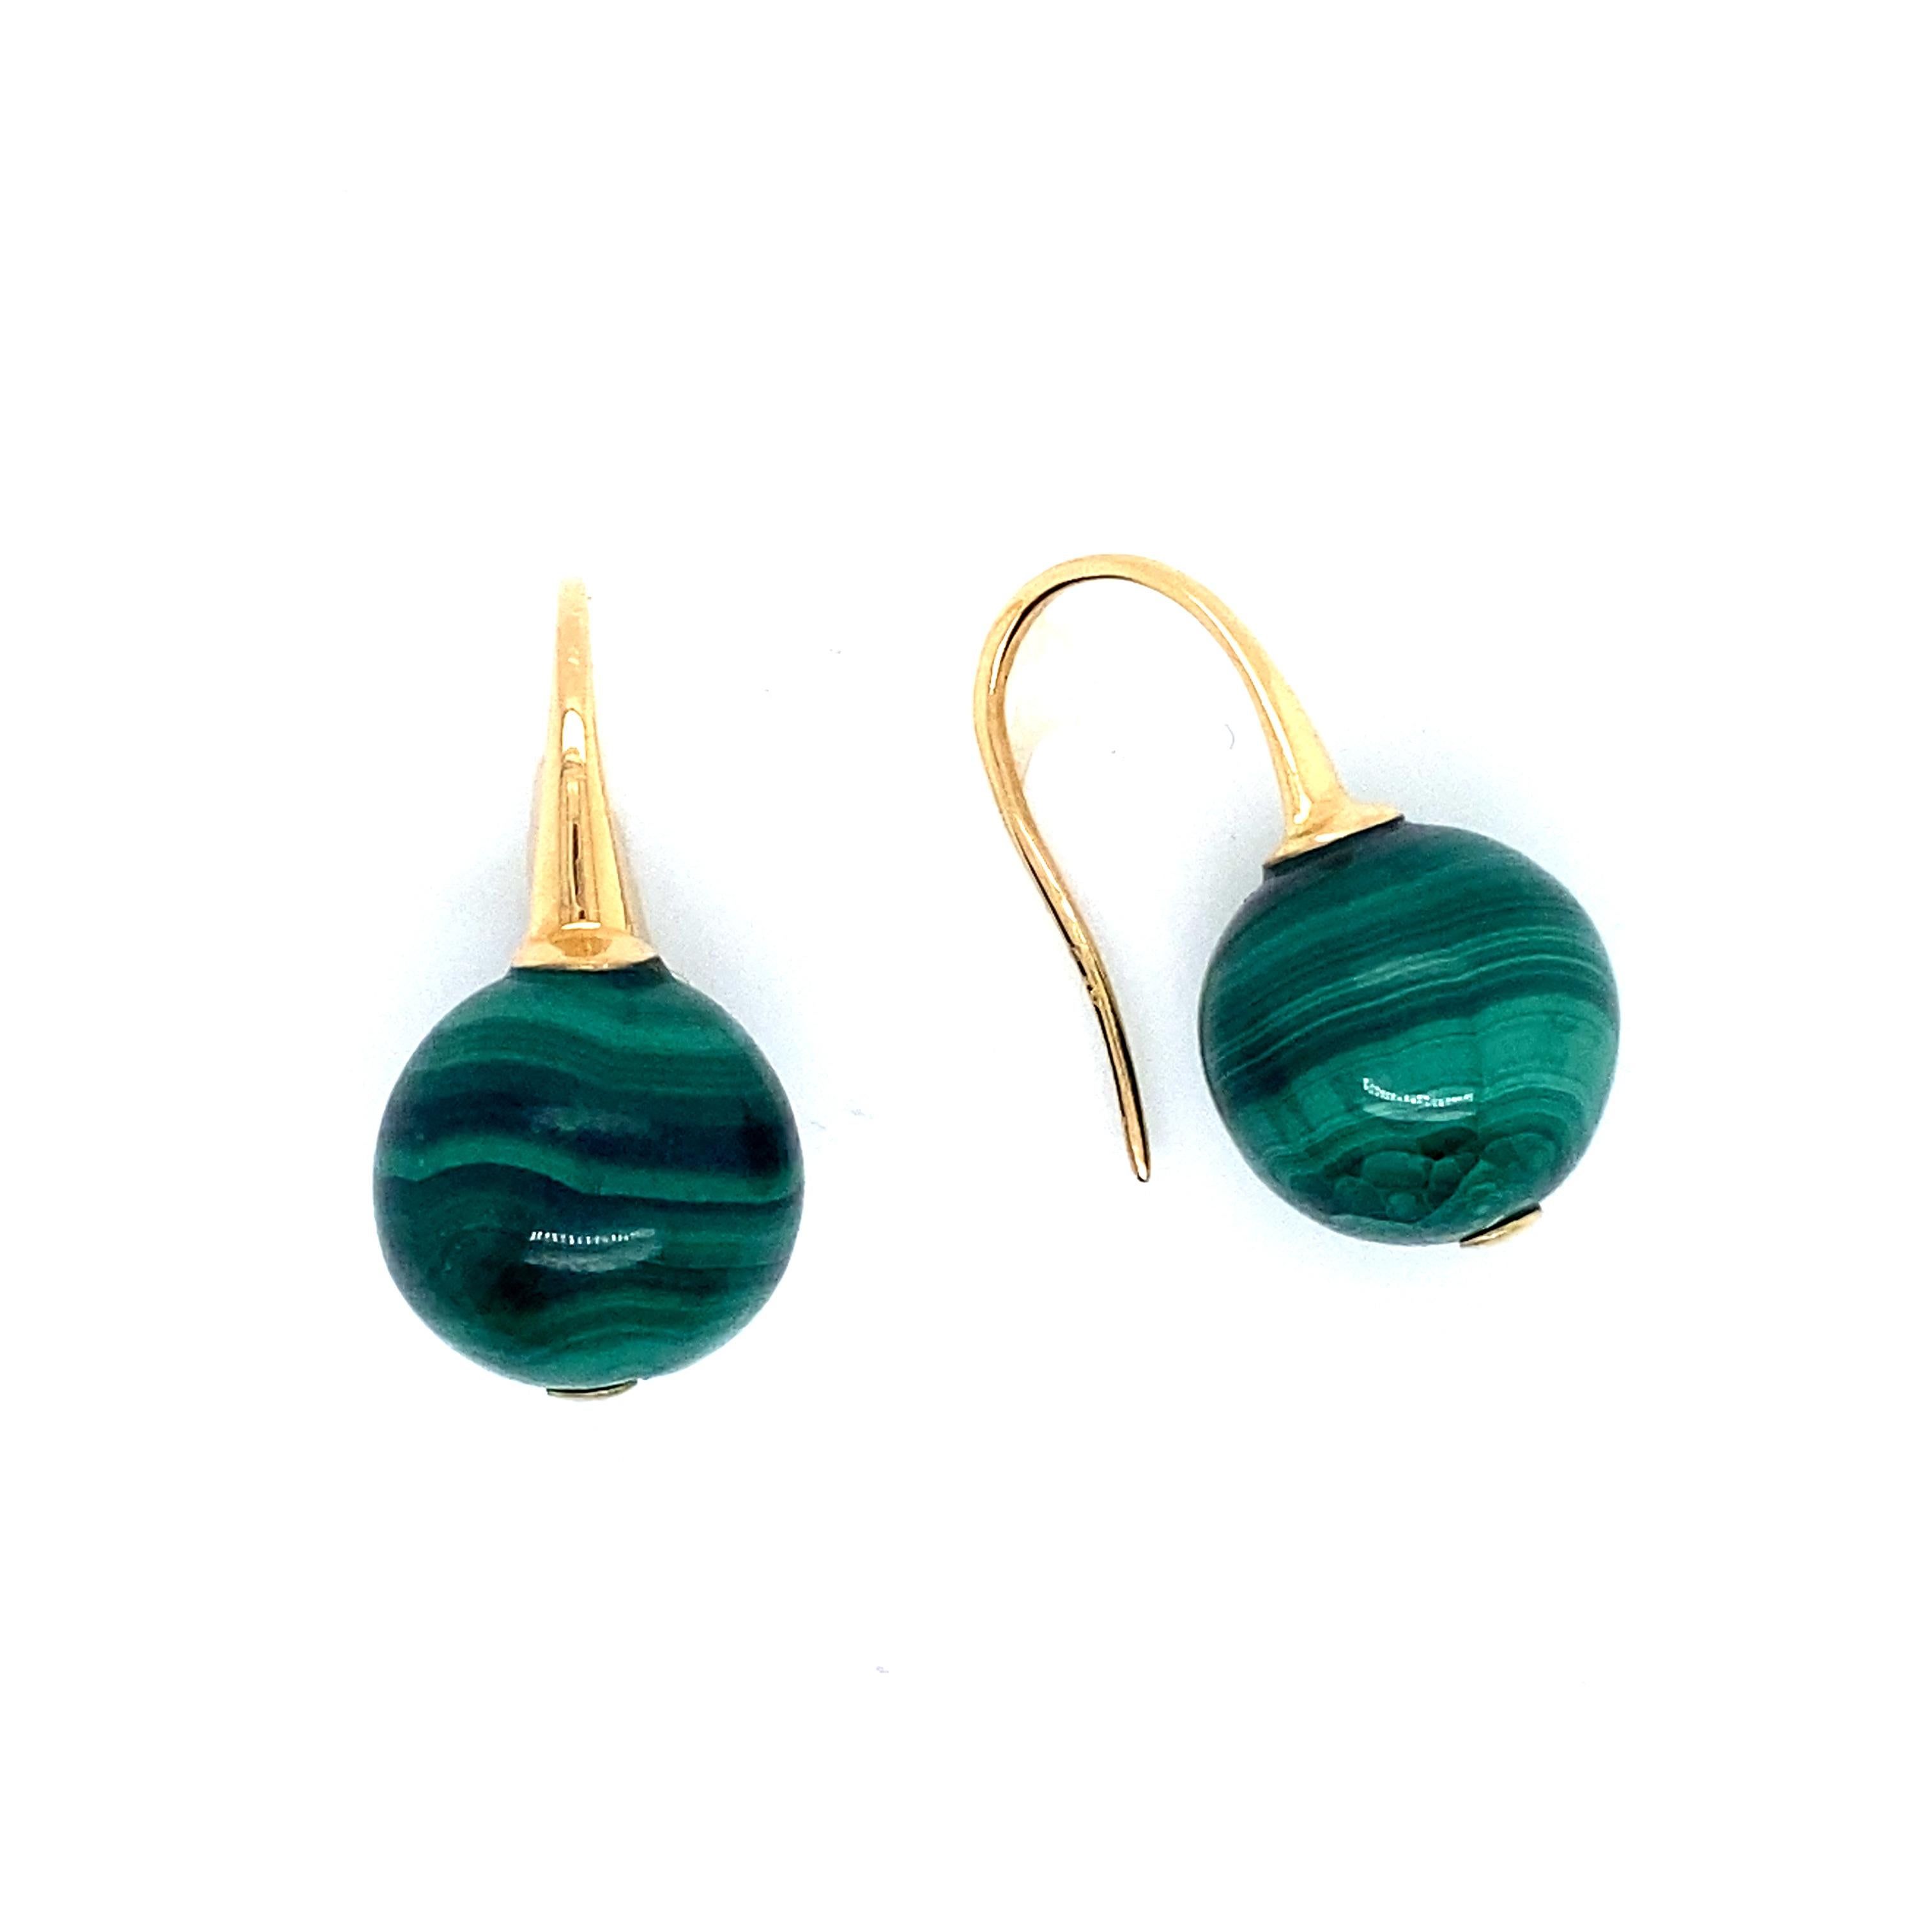 18K Gold Malachite Pendants Earrings
Lovely pair of gold pendants earrings with a ball of malachite on each earrings. The Malakite beads are crossed by a gold rod.

Details of product:

Carats: 18 carats
Lenght: 2.7 cm/ 1.8 inch
Width: 1.4 cm/ 0.5